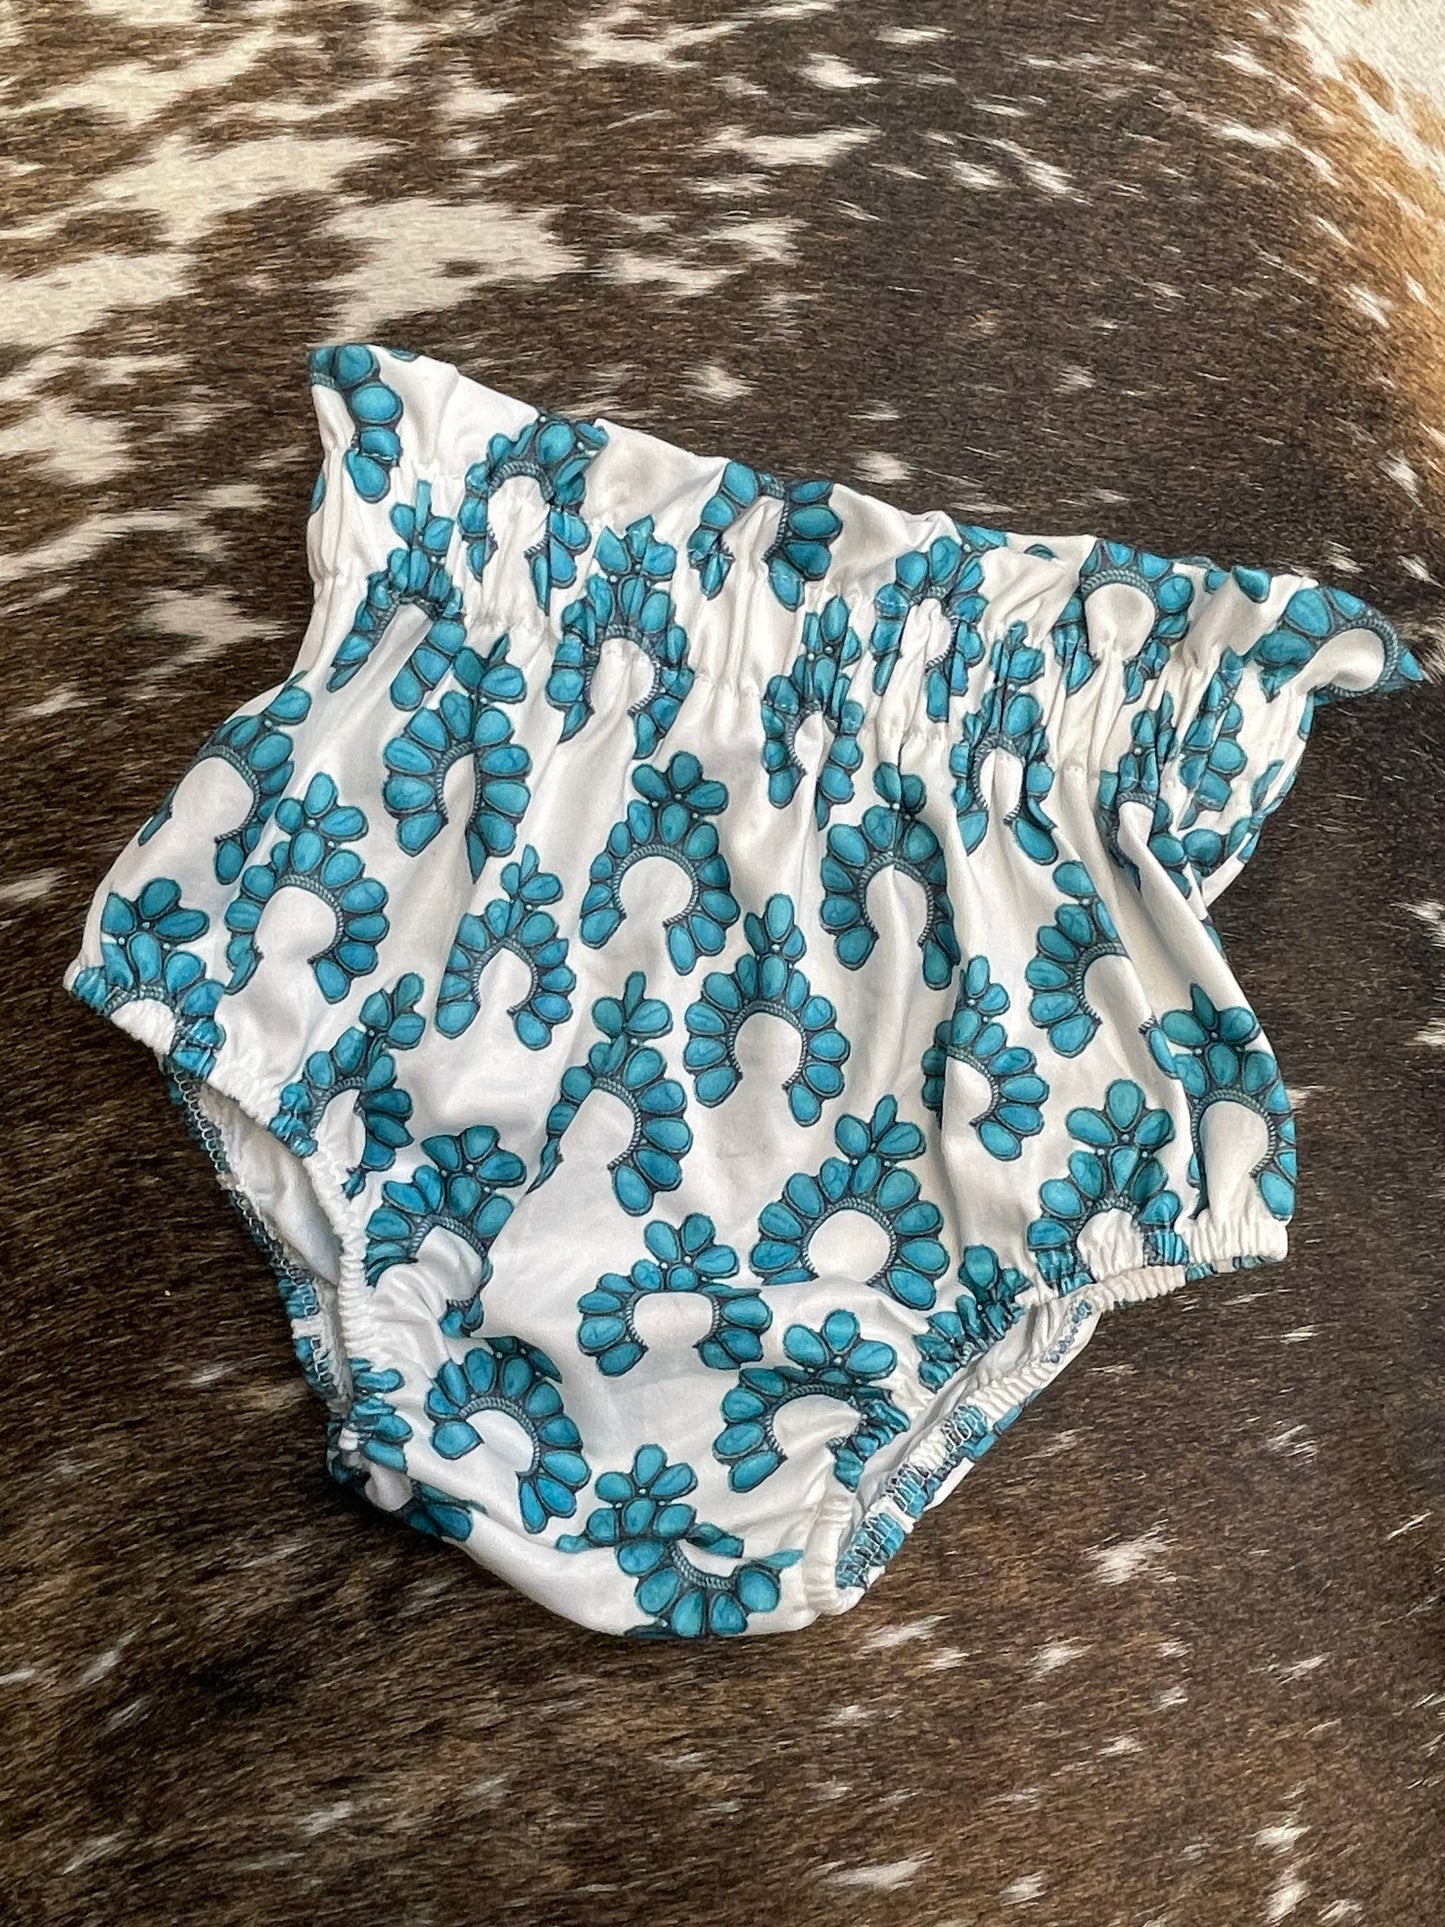 The Turquoise Queen Bloomers